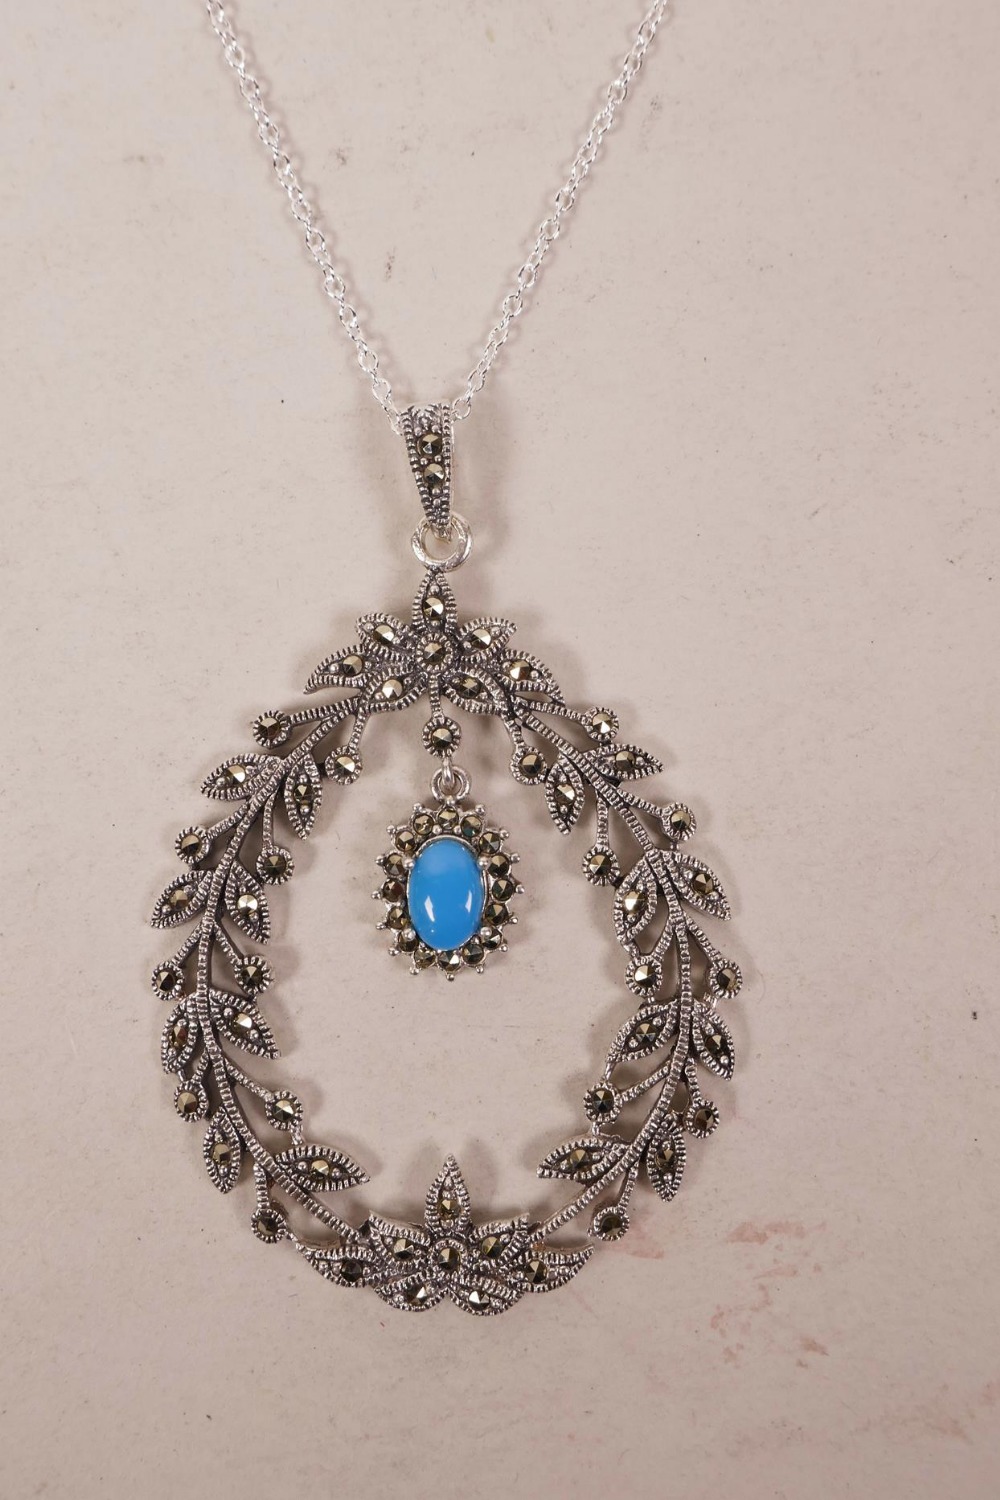 A 925 silver and marcasite set pendant necklace in the form of a wreath with a turquoise drop, 3"